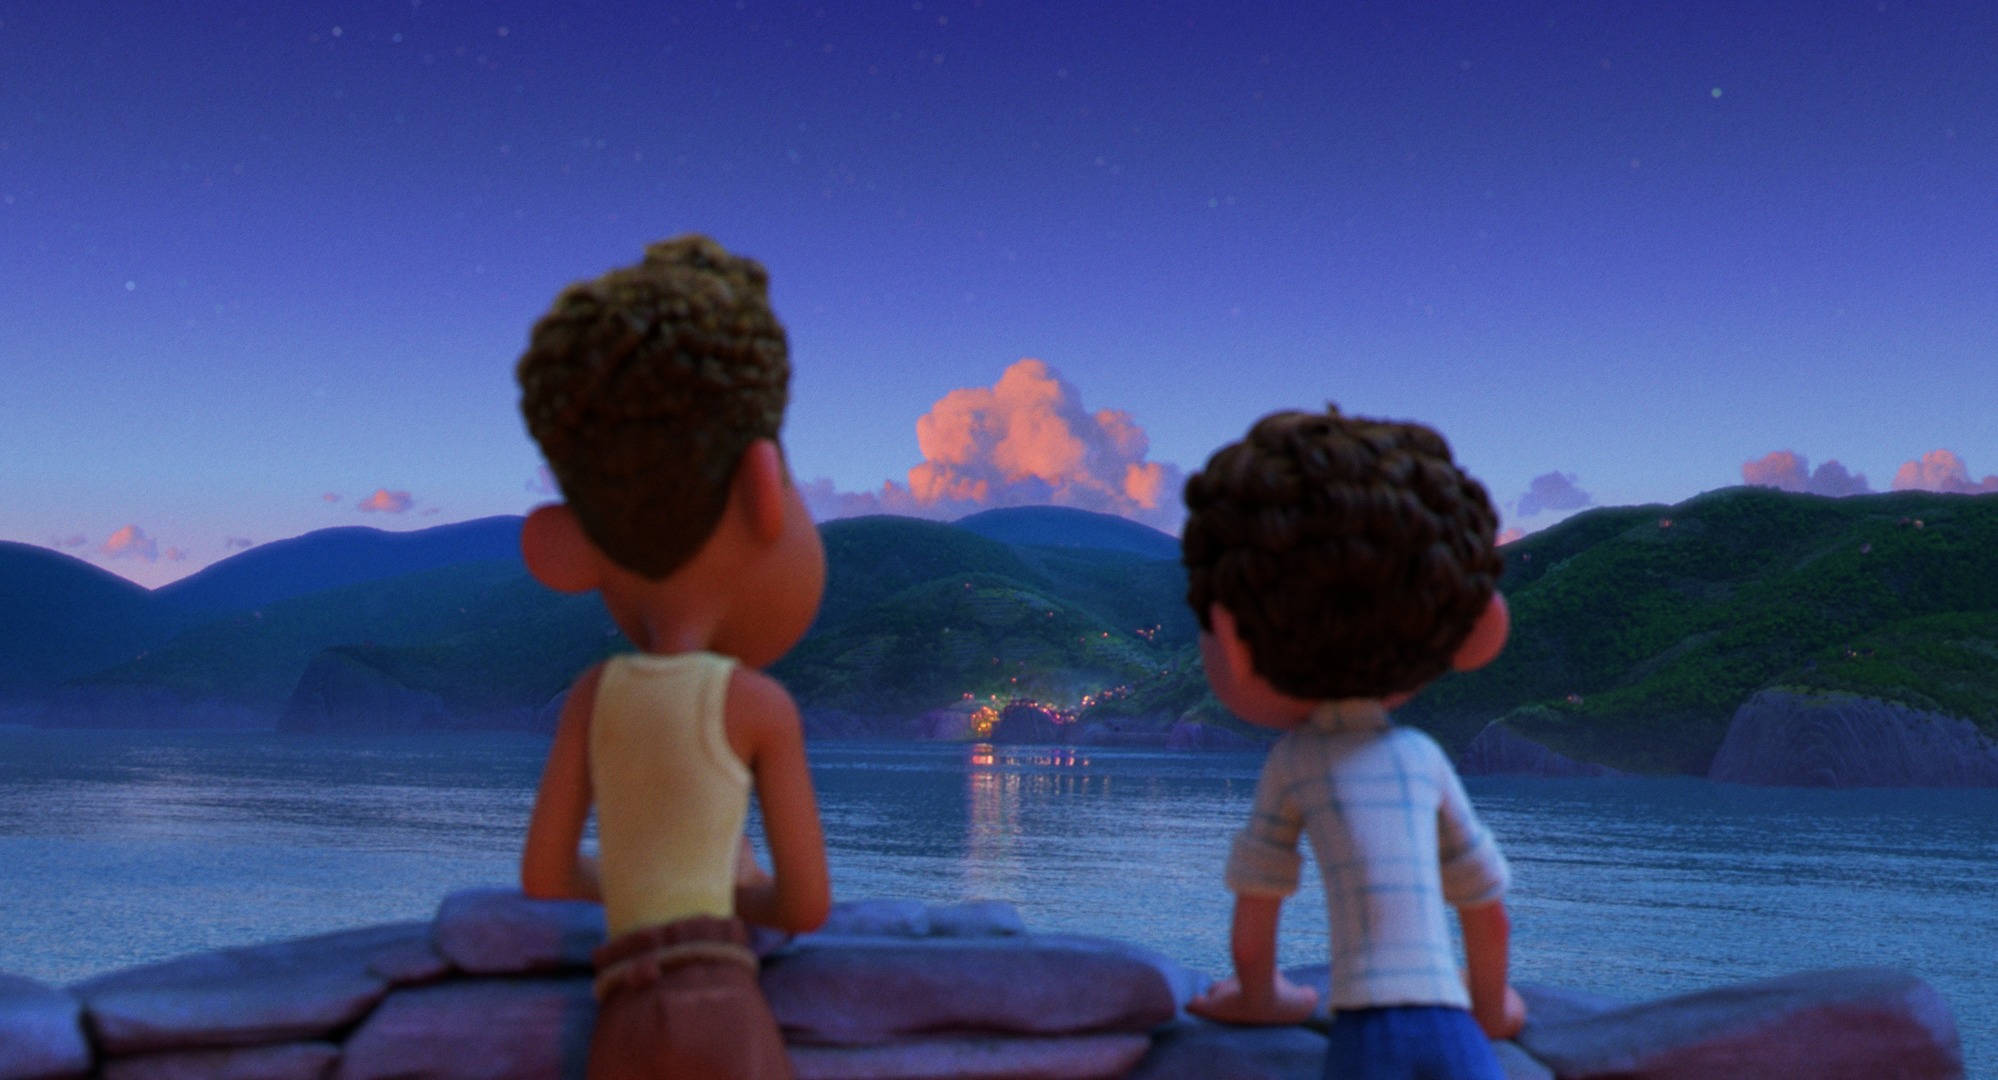 luca and alberto looking out at a town in the evening